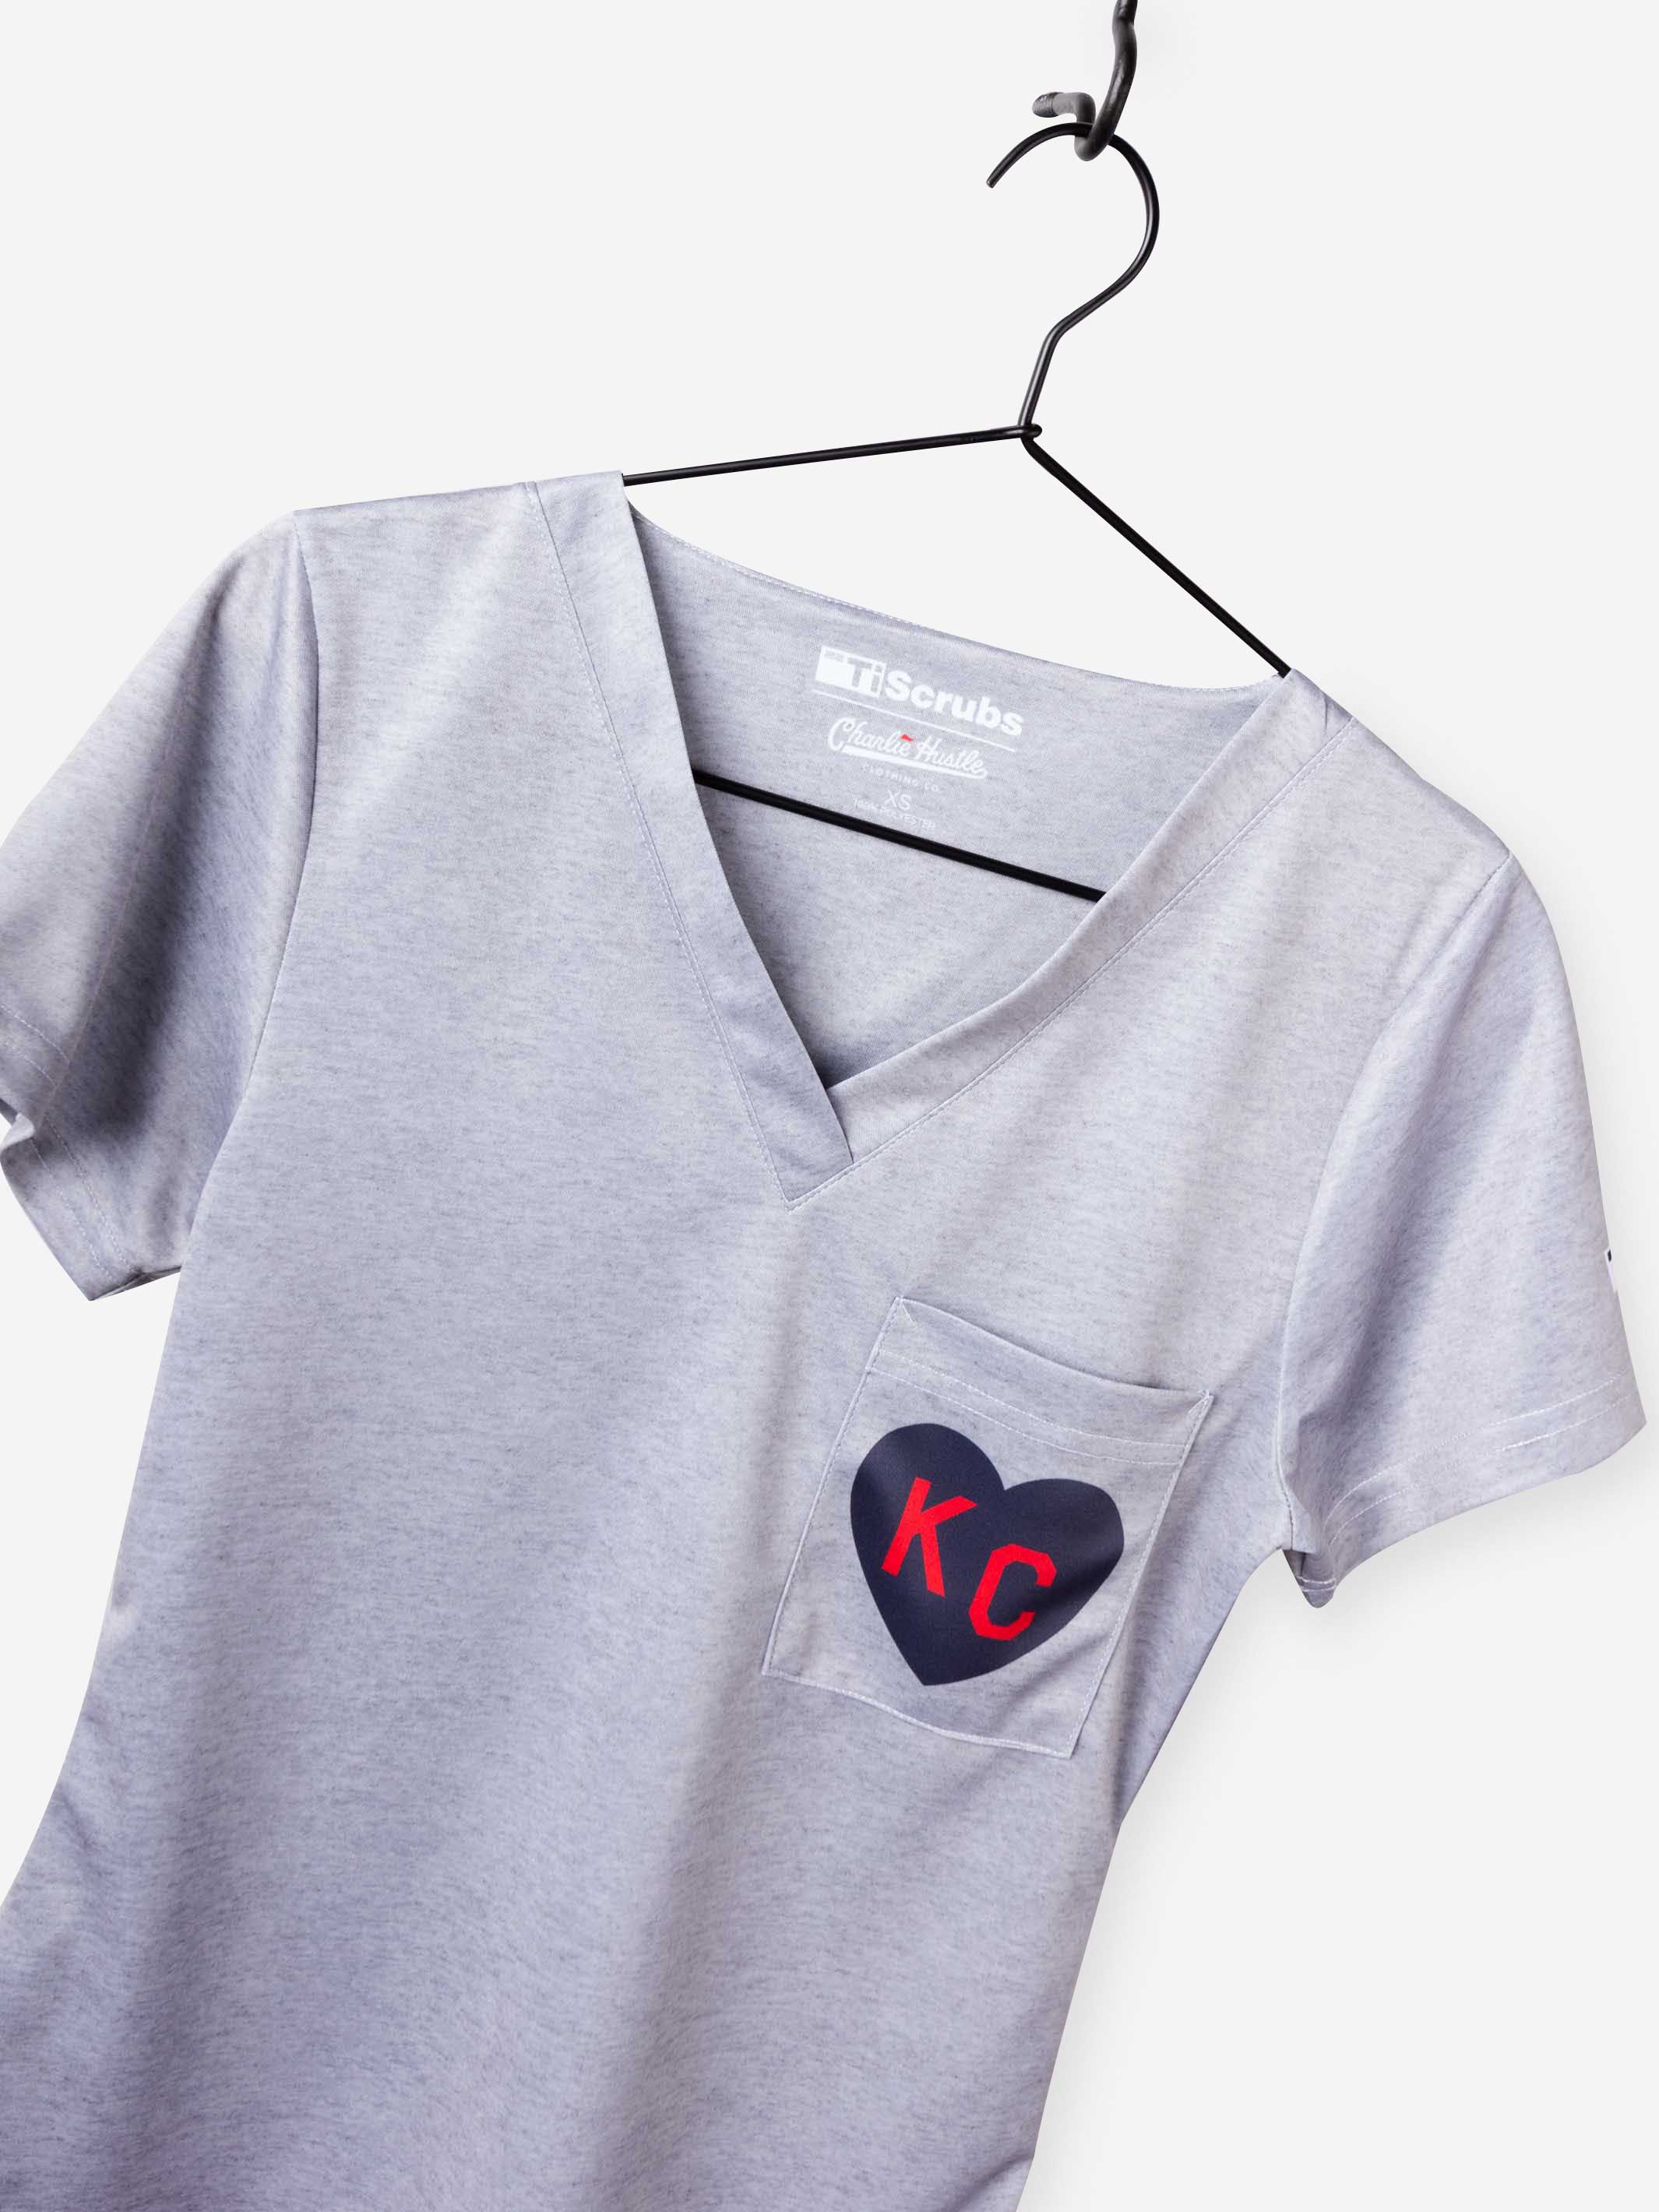 Women's Charlie Hustle Scrub Top KC Heart in Navy and Red Chest Pocket